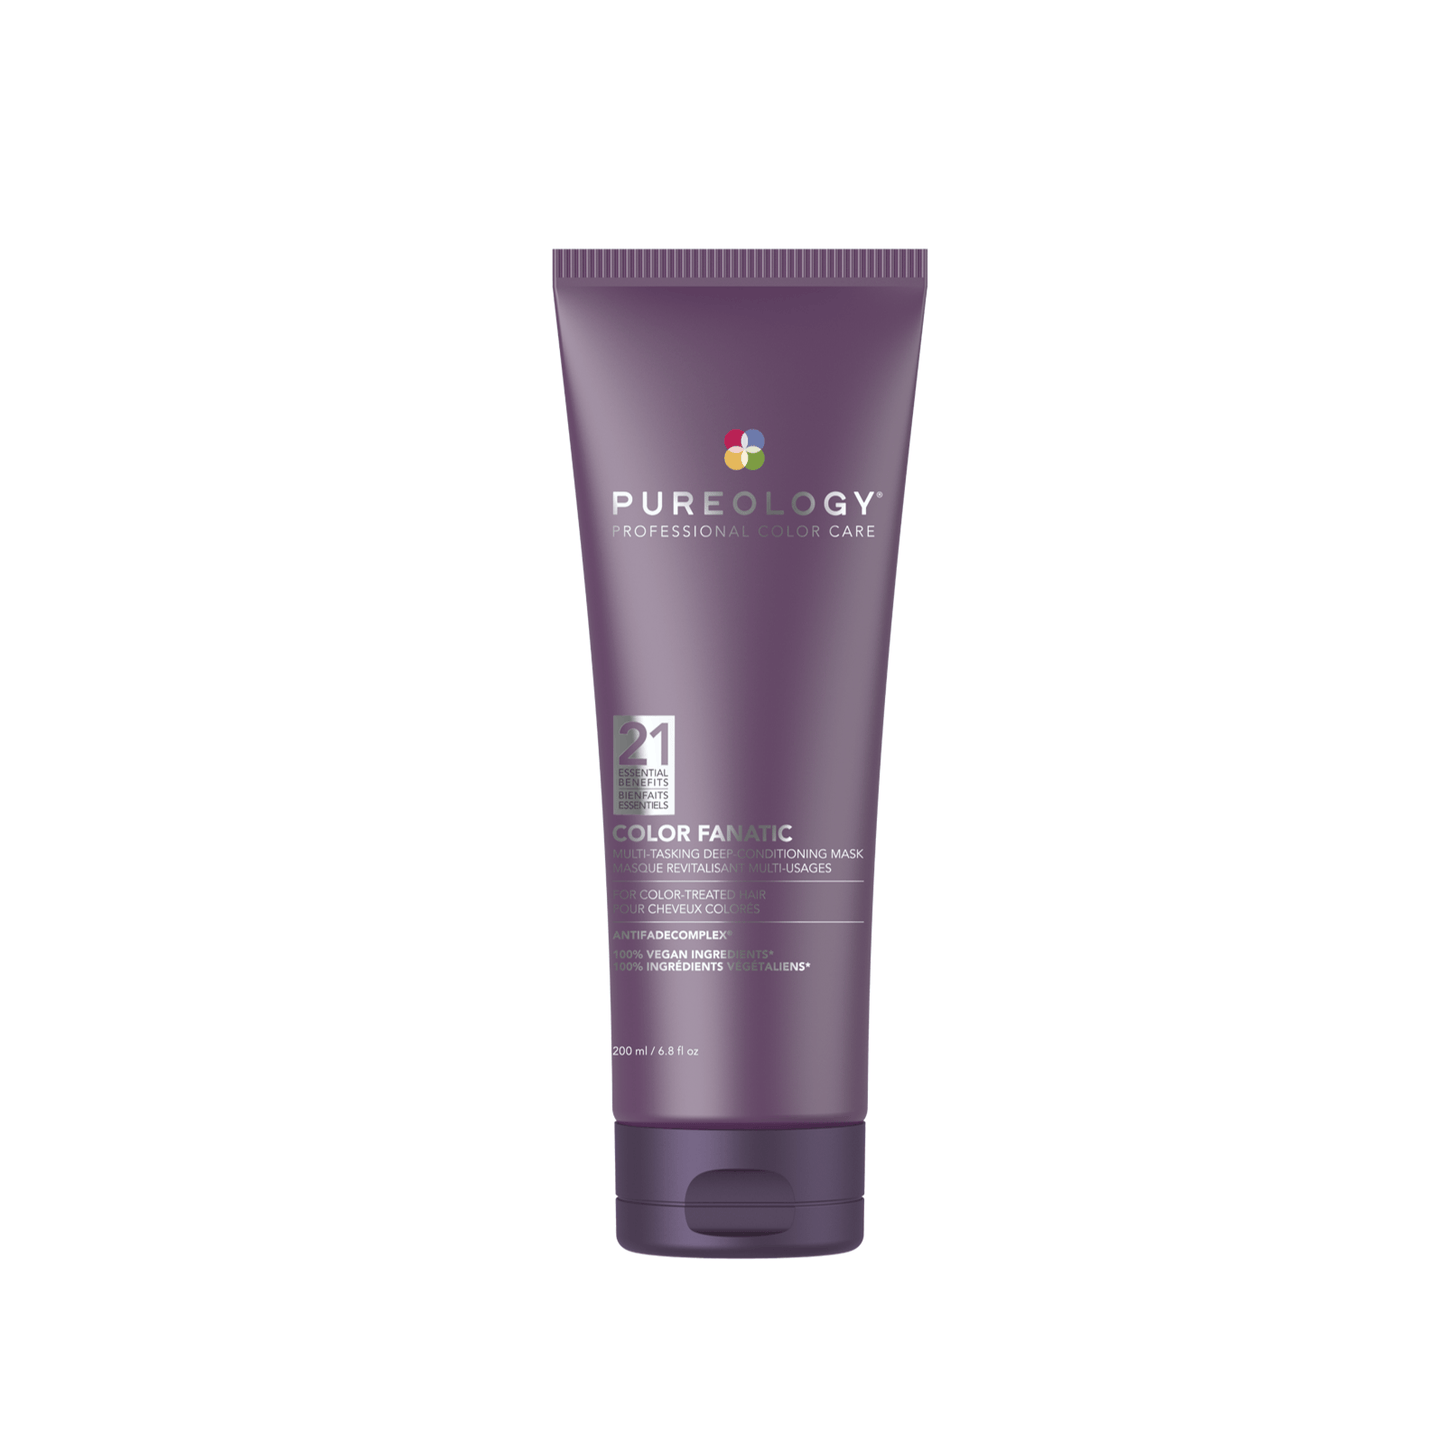 Pureology Colour Fanatic Instant Deep-Conditioning Masque 200ml